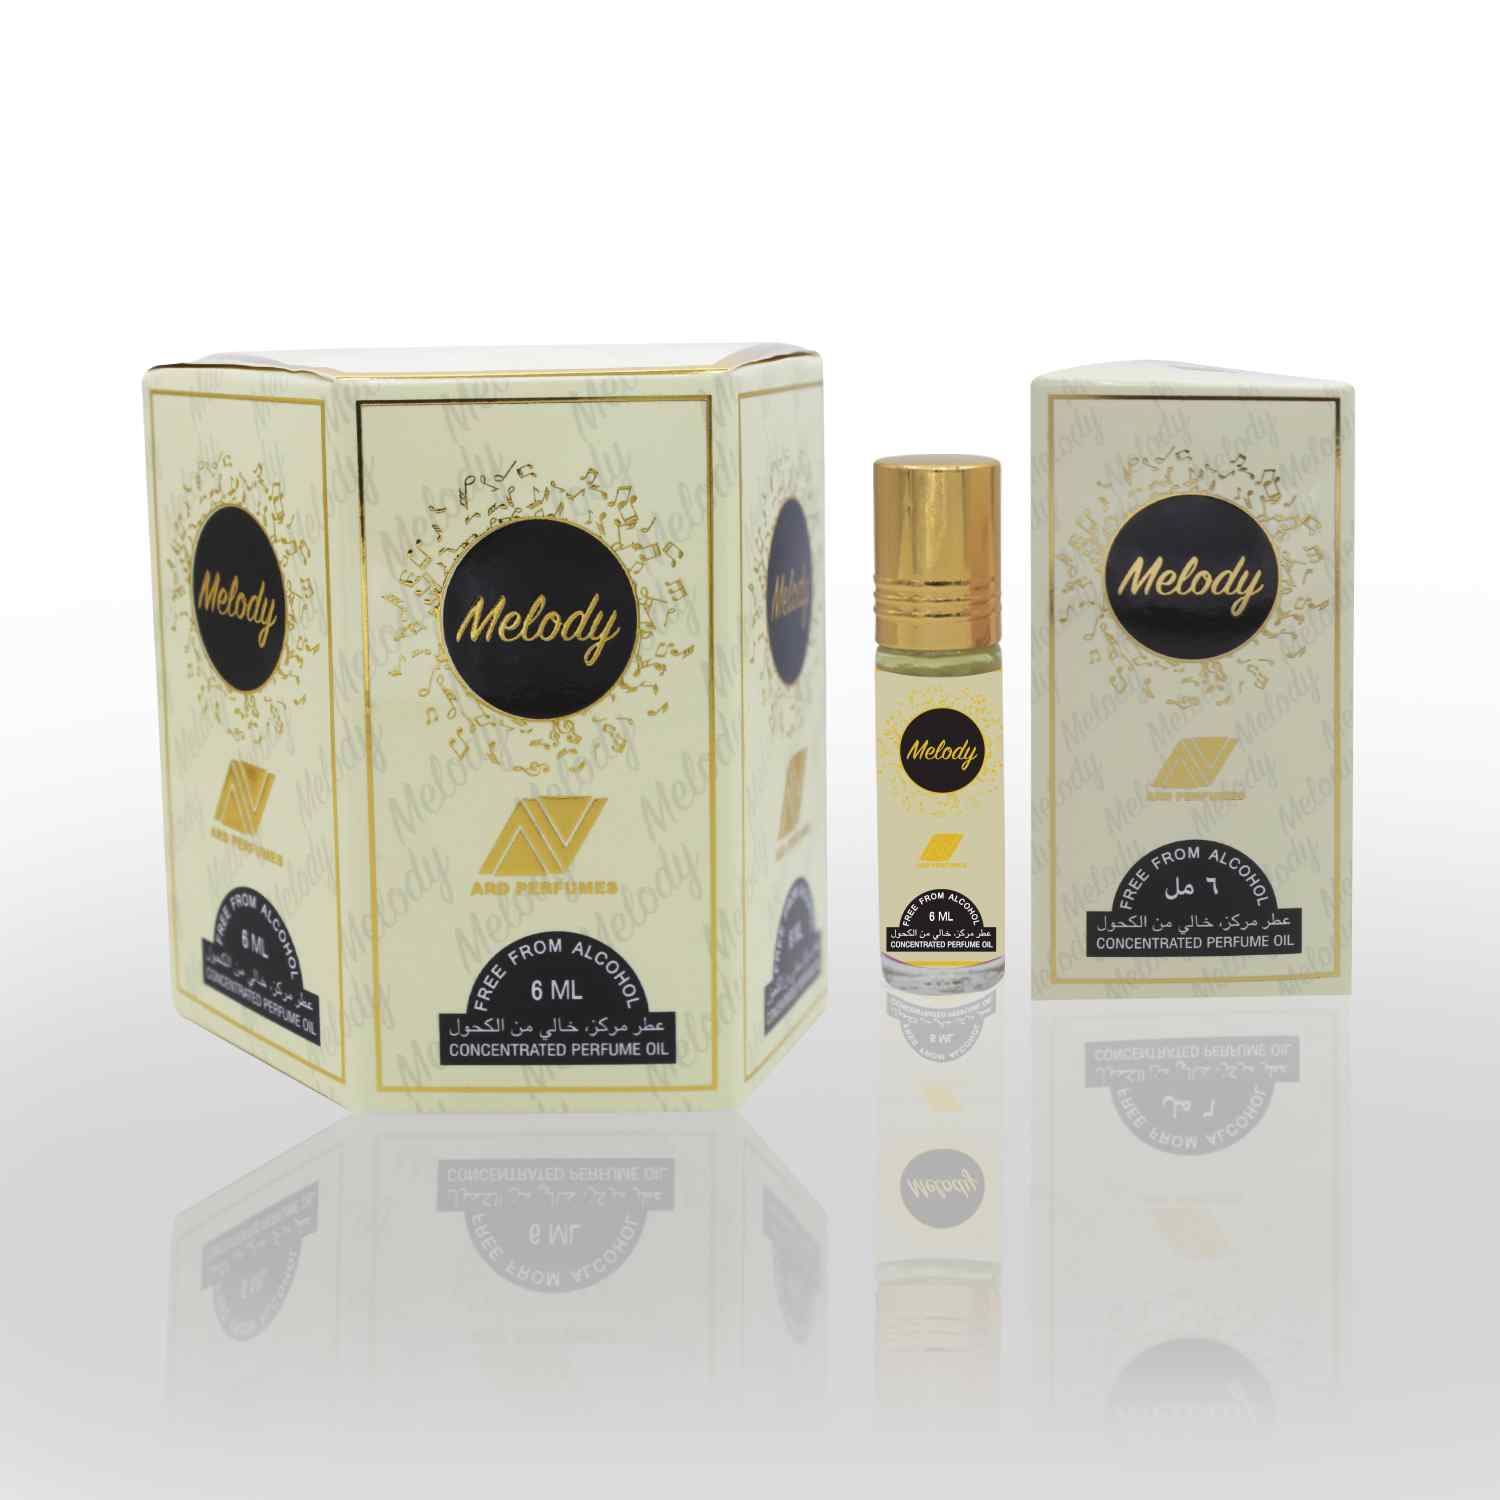 Melody 6ml Rollon by ARD PERFUMES